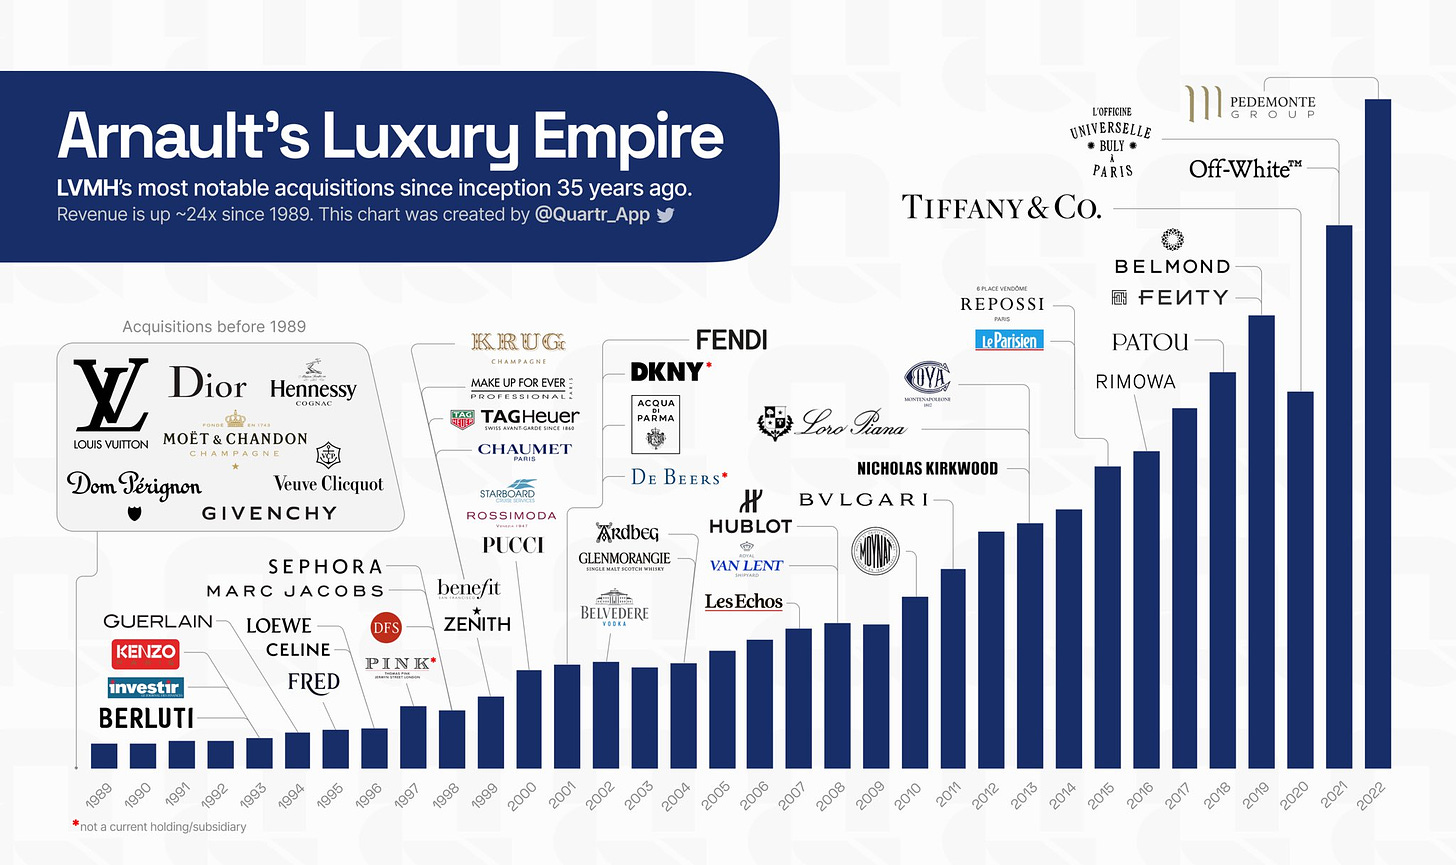 Quartr on Twitter: "Luxury giant $LVMH's most notable acquisitions since  inception: https://t.co/jvgG8XvYX2" / X